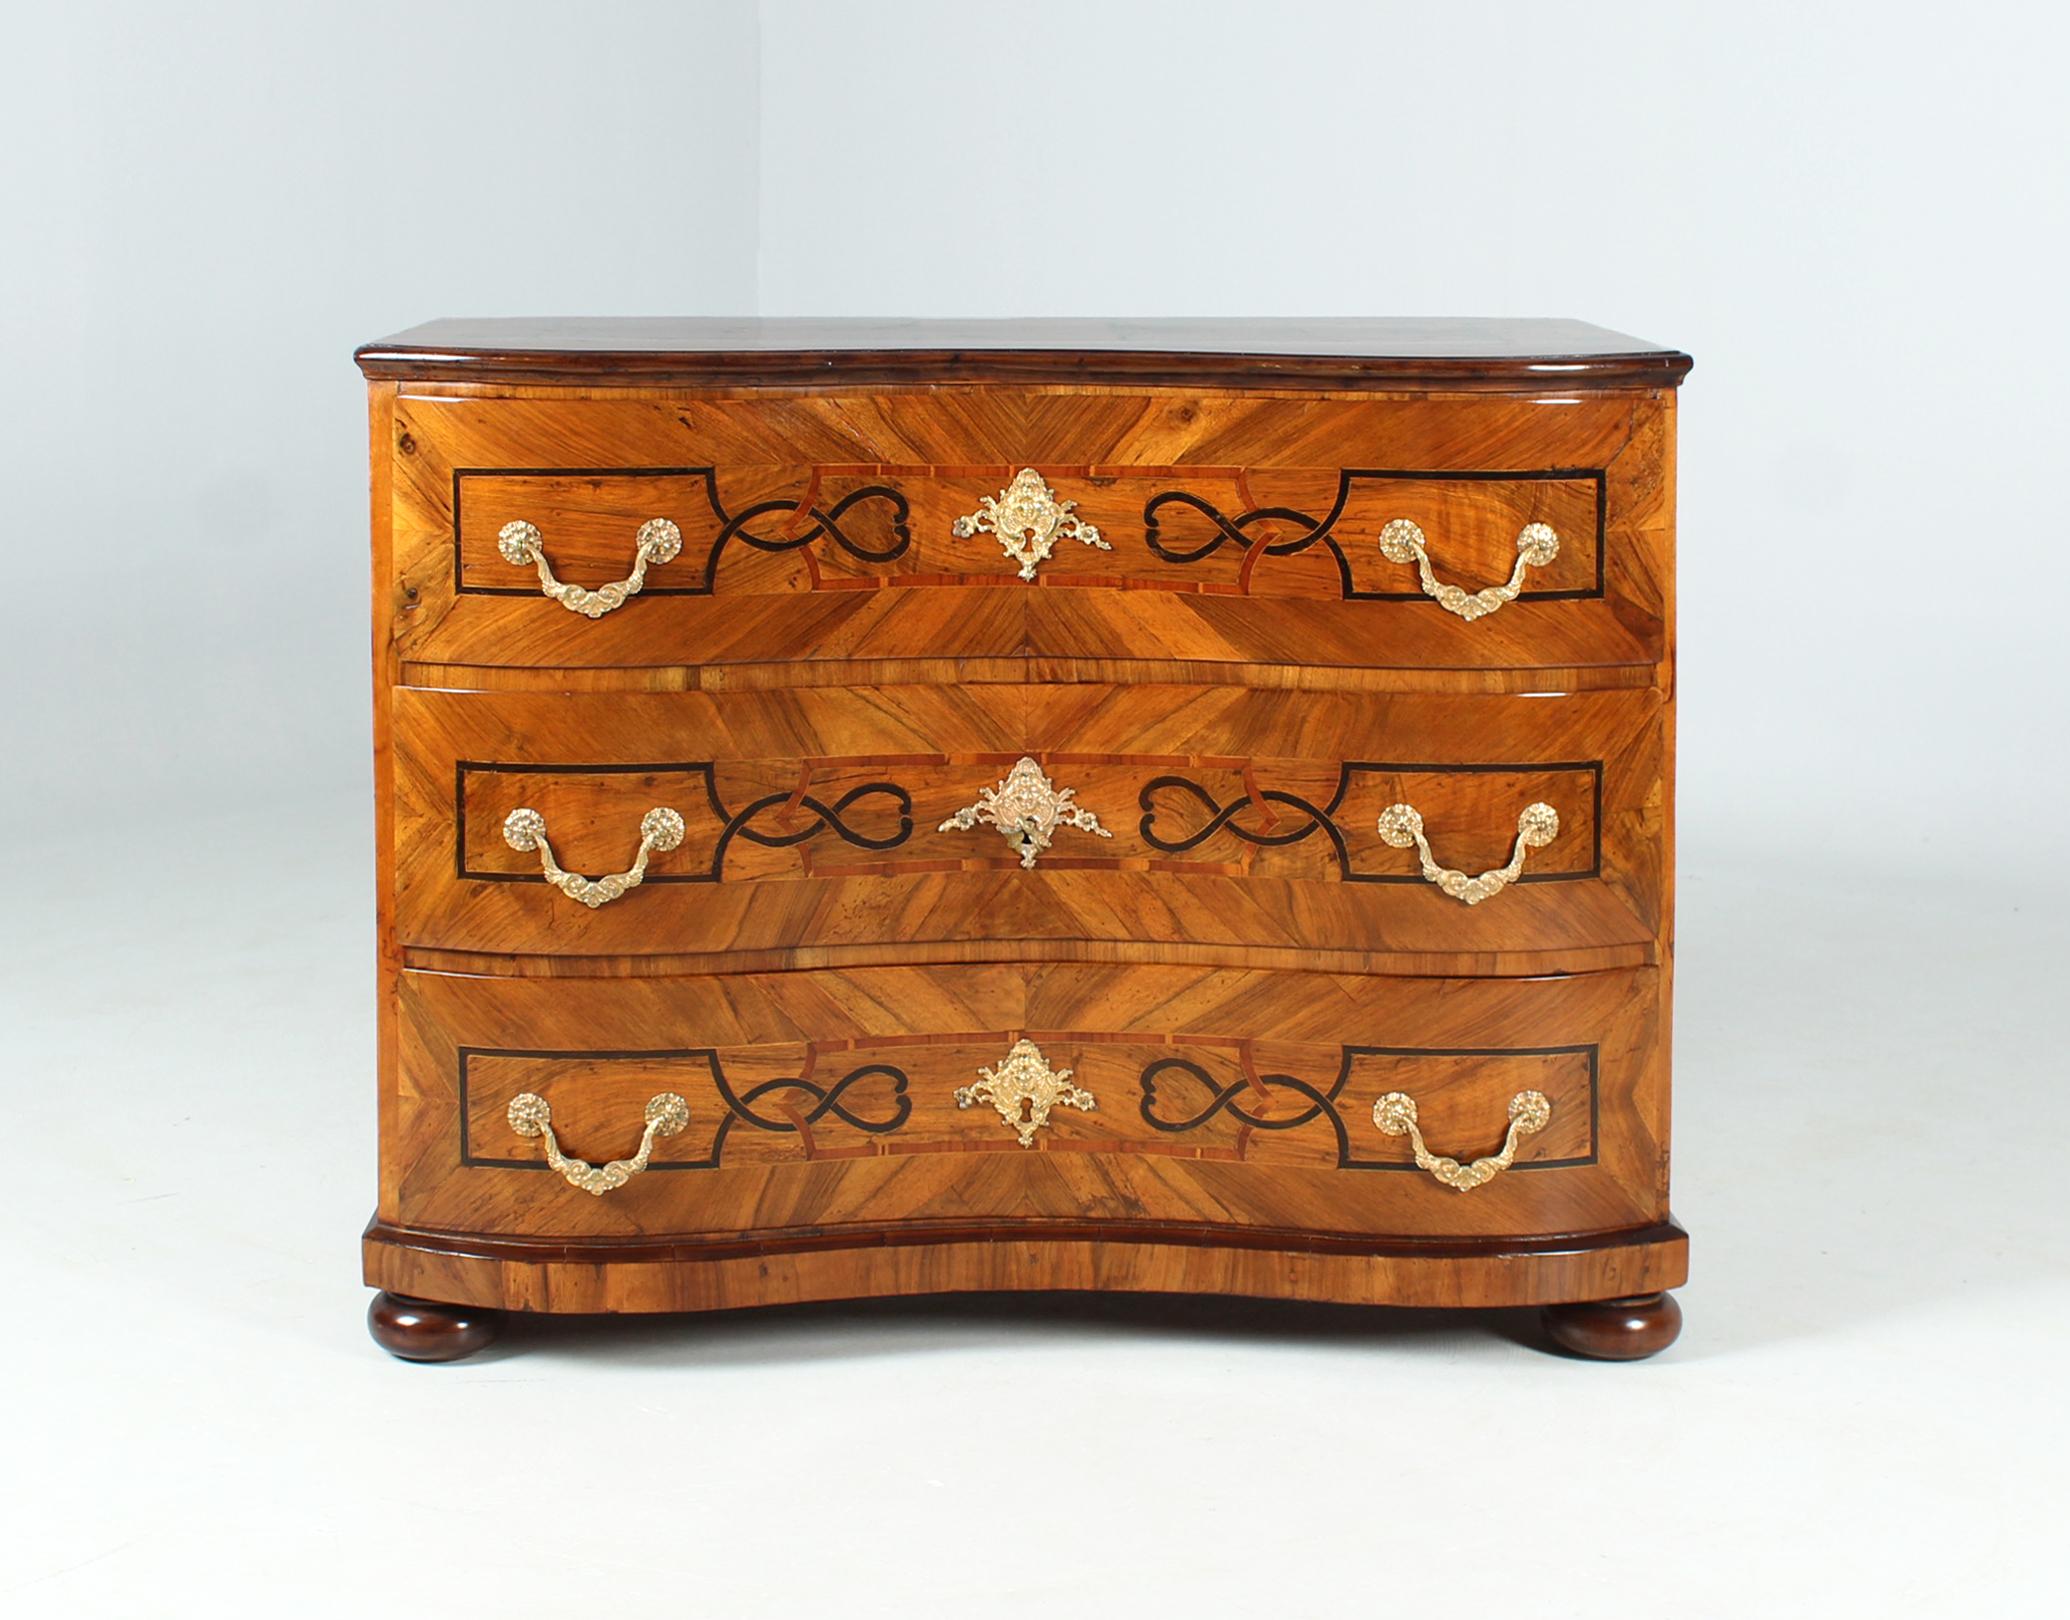 South German Baroque Commode with central lock

Southern Germany (Munich)
Walnut a.o.
Baroque around 1750

Dimensions: H x W x D: 83 x 109 x 55 cm

Description:
Beautiful southern German baroque chest of drawers in pleasing